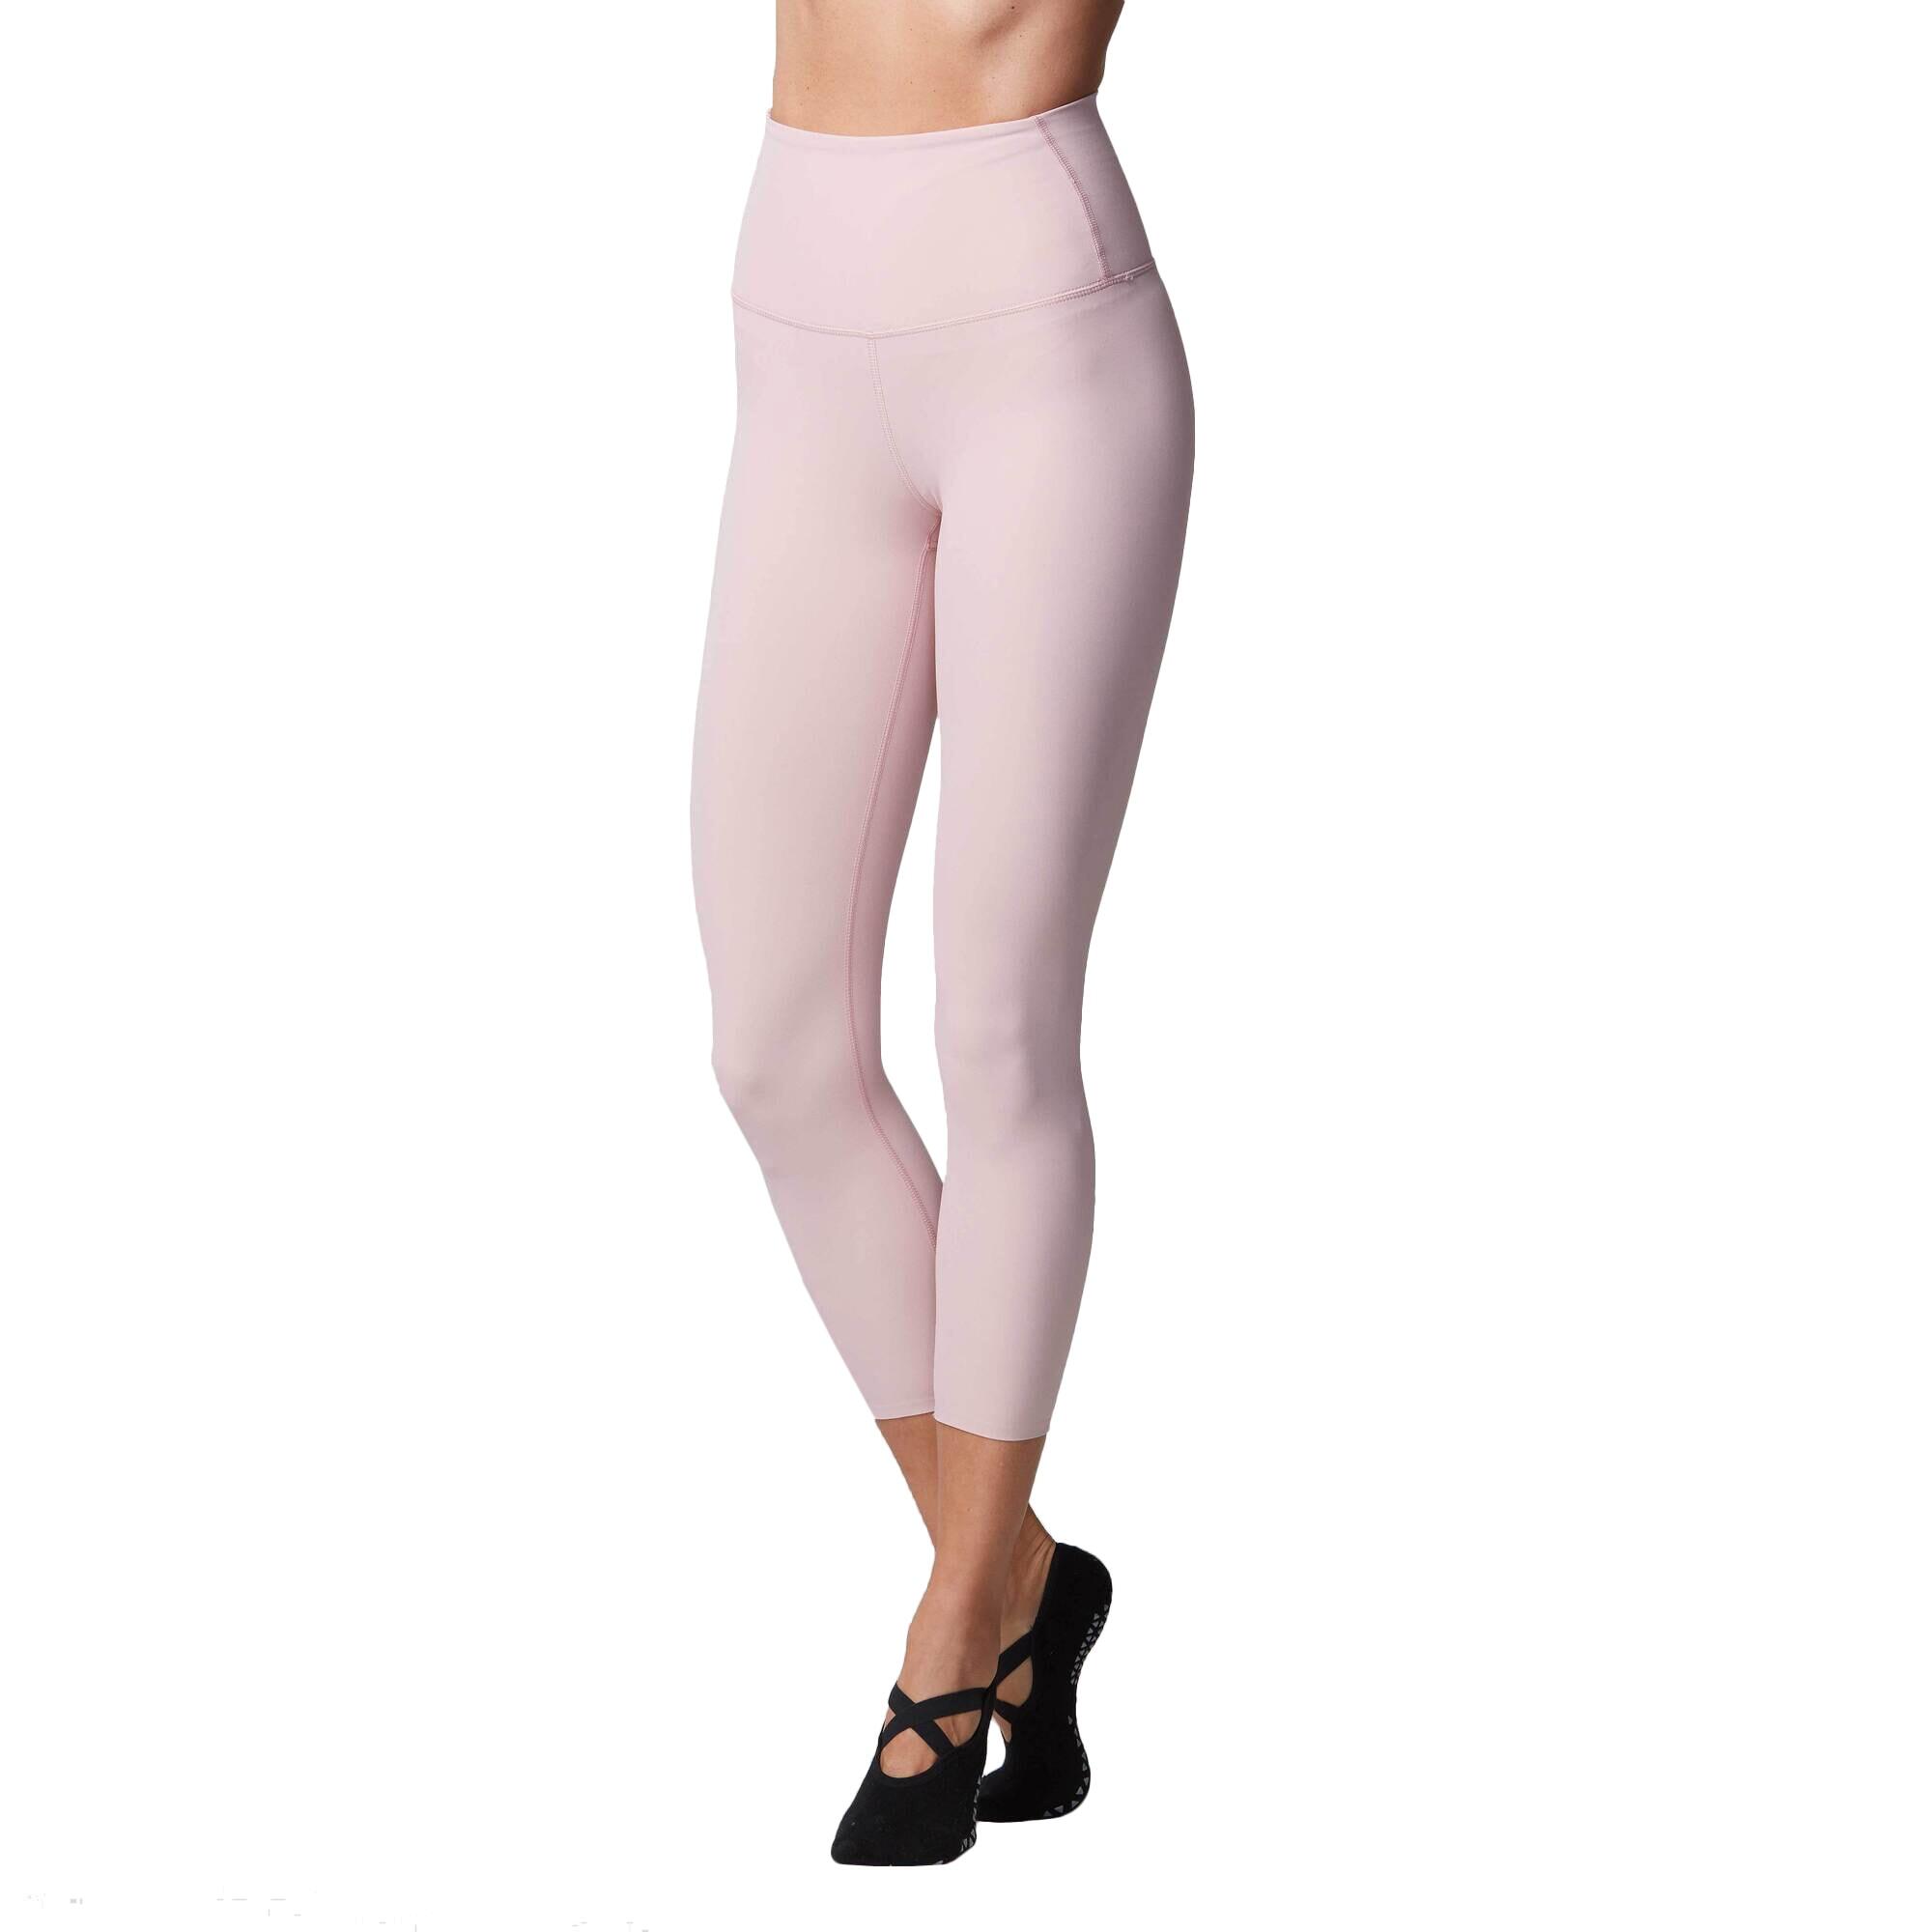 FITNESS-MAD Womens/Ladies Cropped High Waist Leggings (Pink)